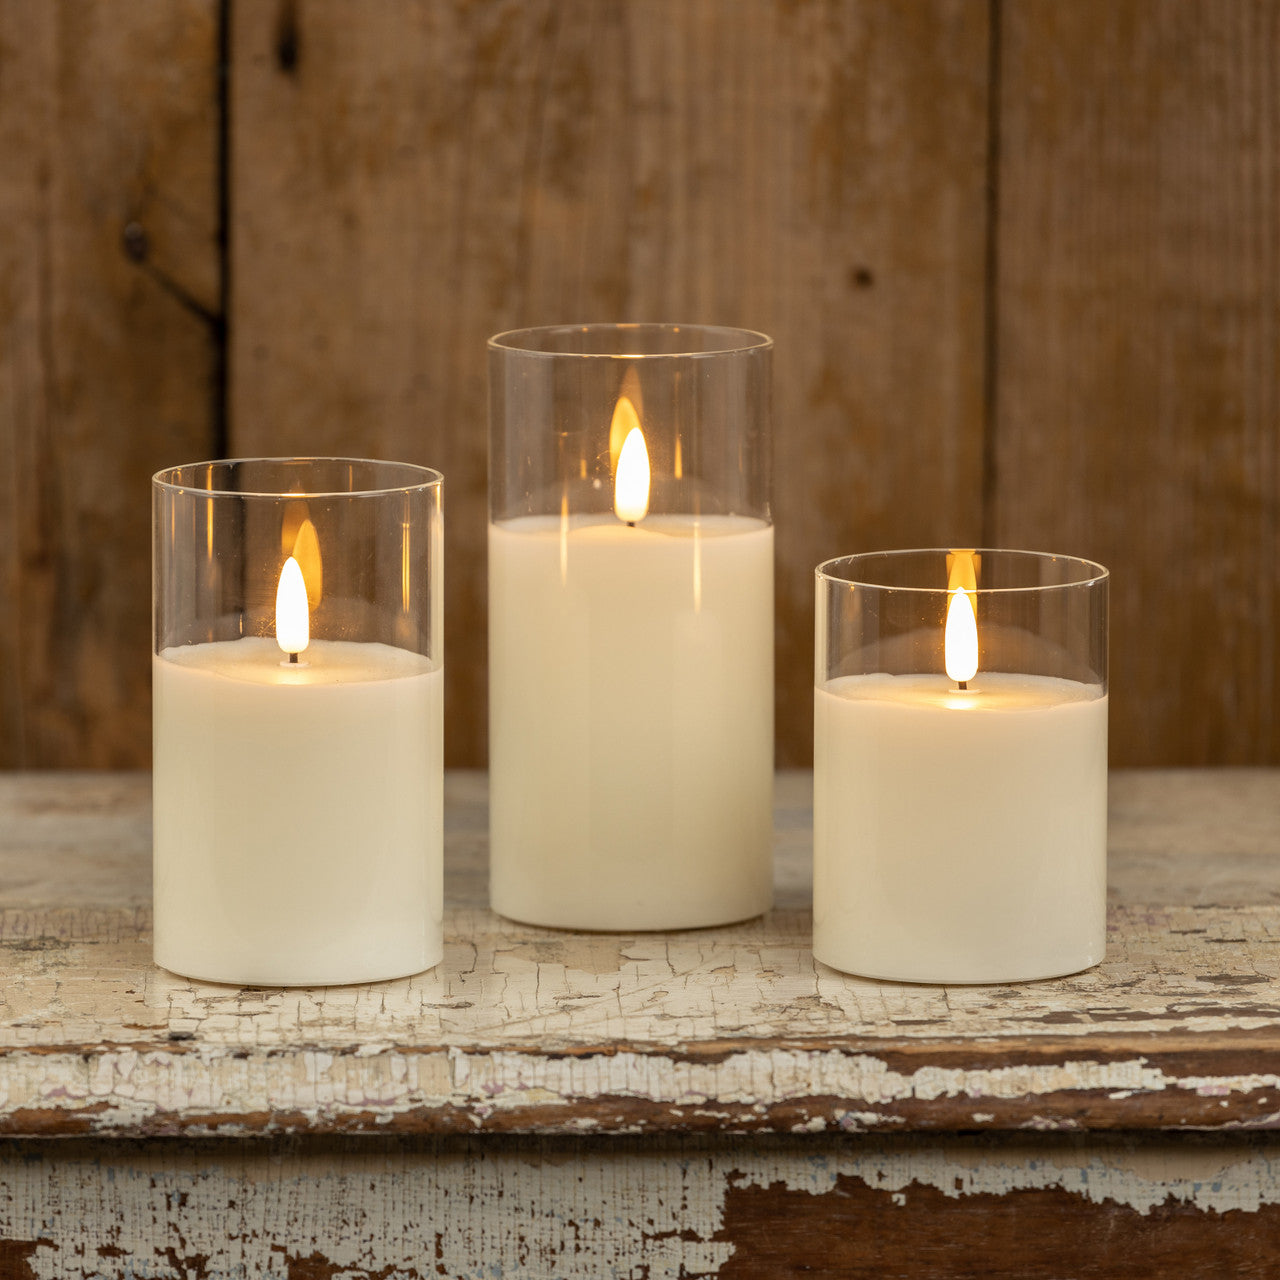 Glass Flame Candle, The Feathered Farmhouse